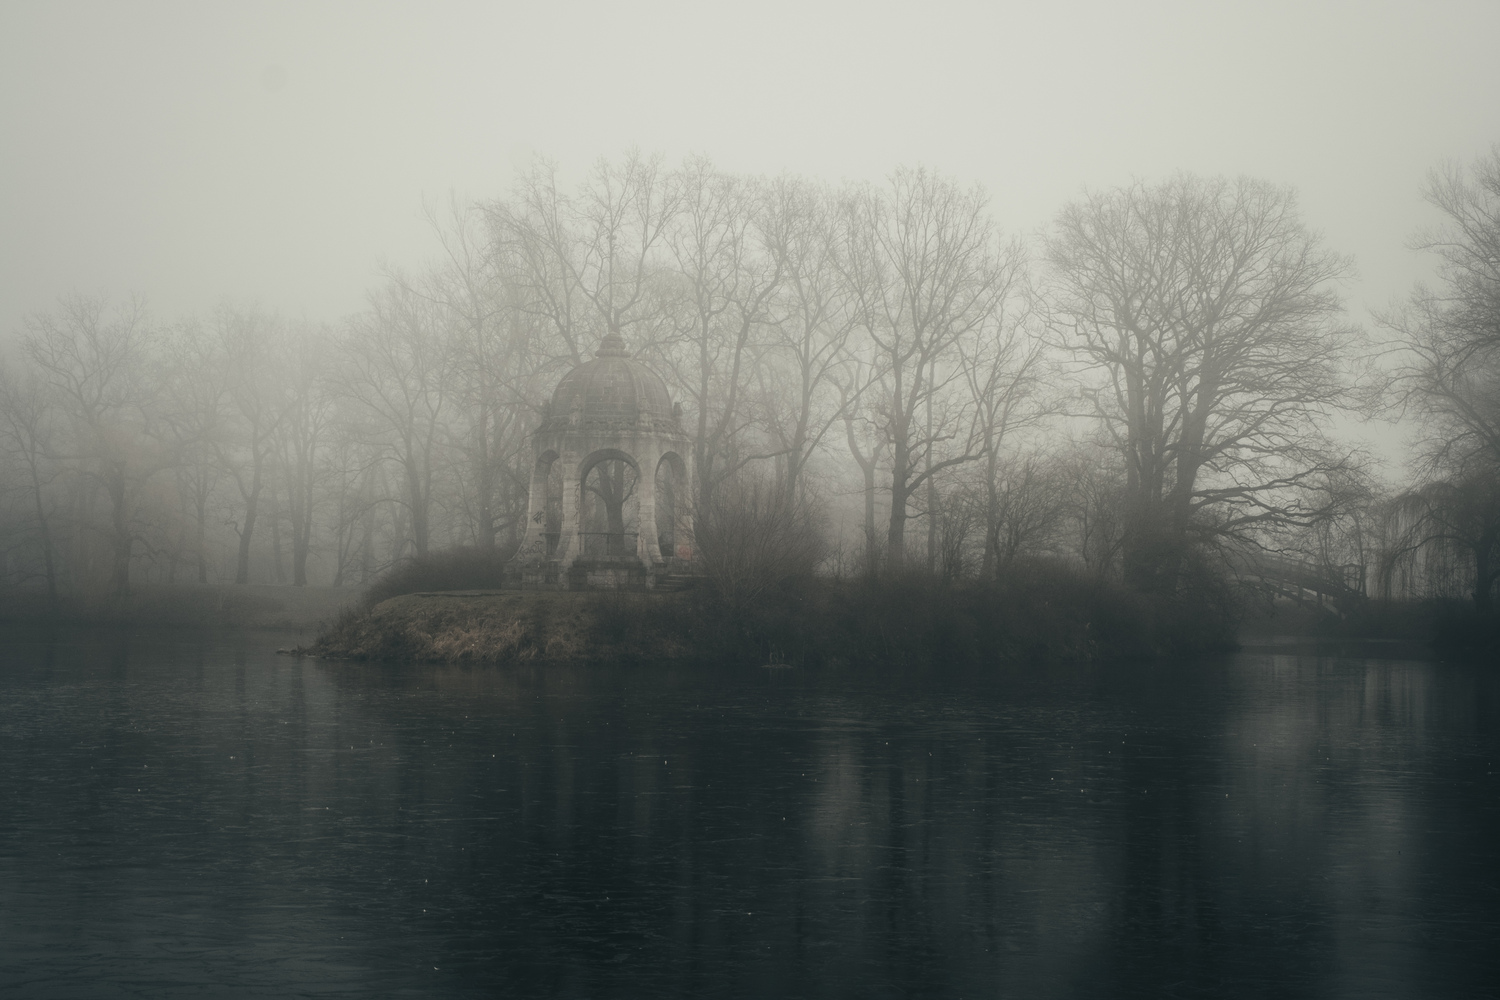 Fog covering an observation deck on a lake island.